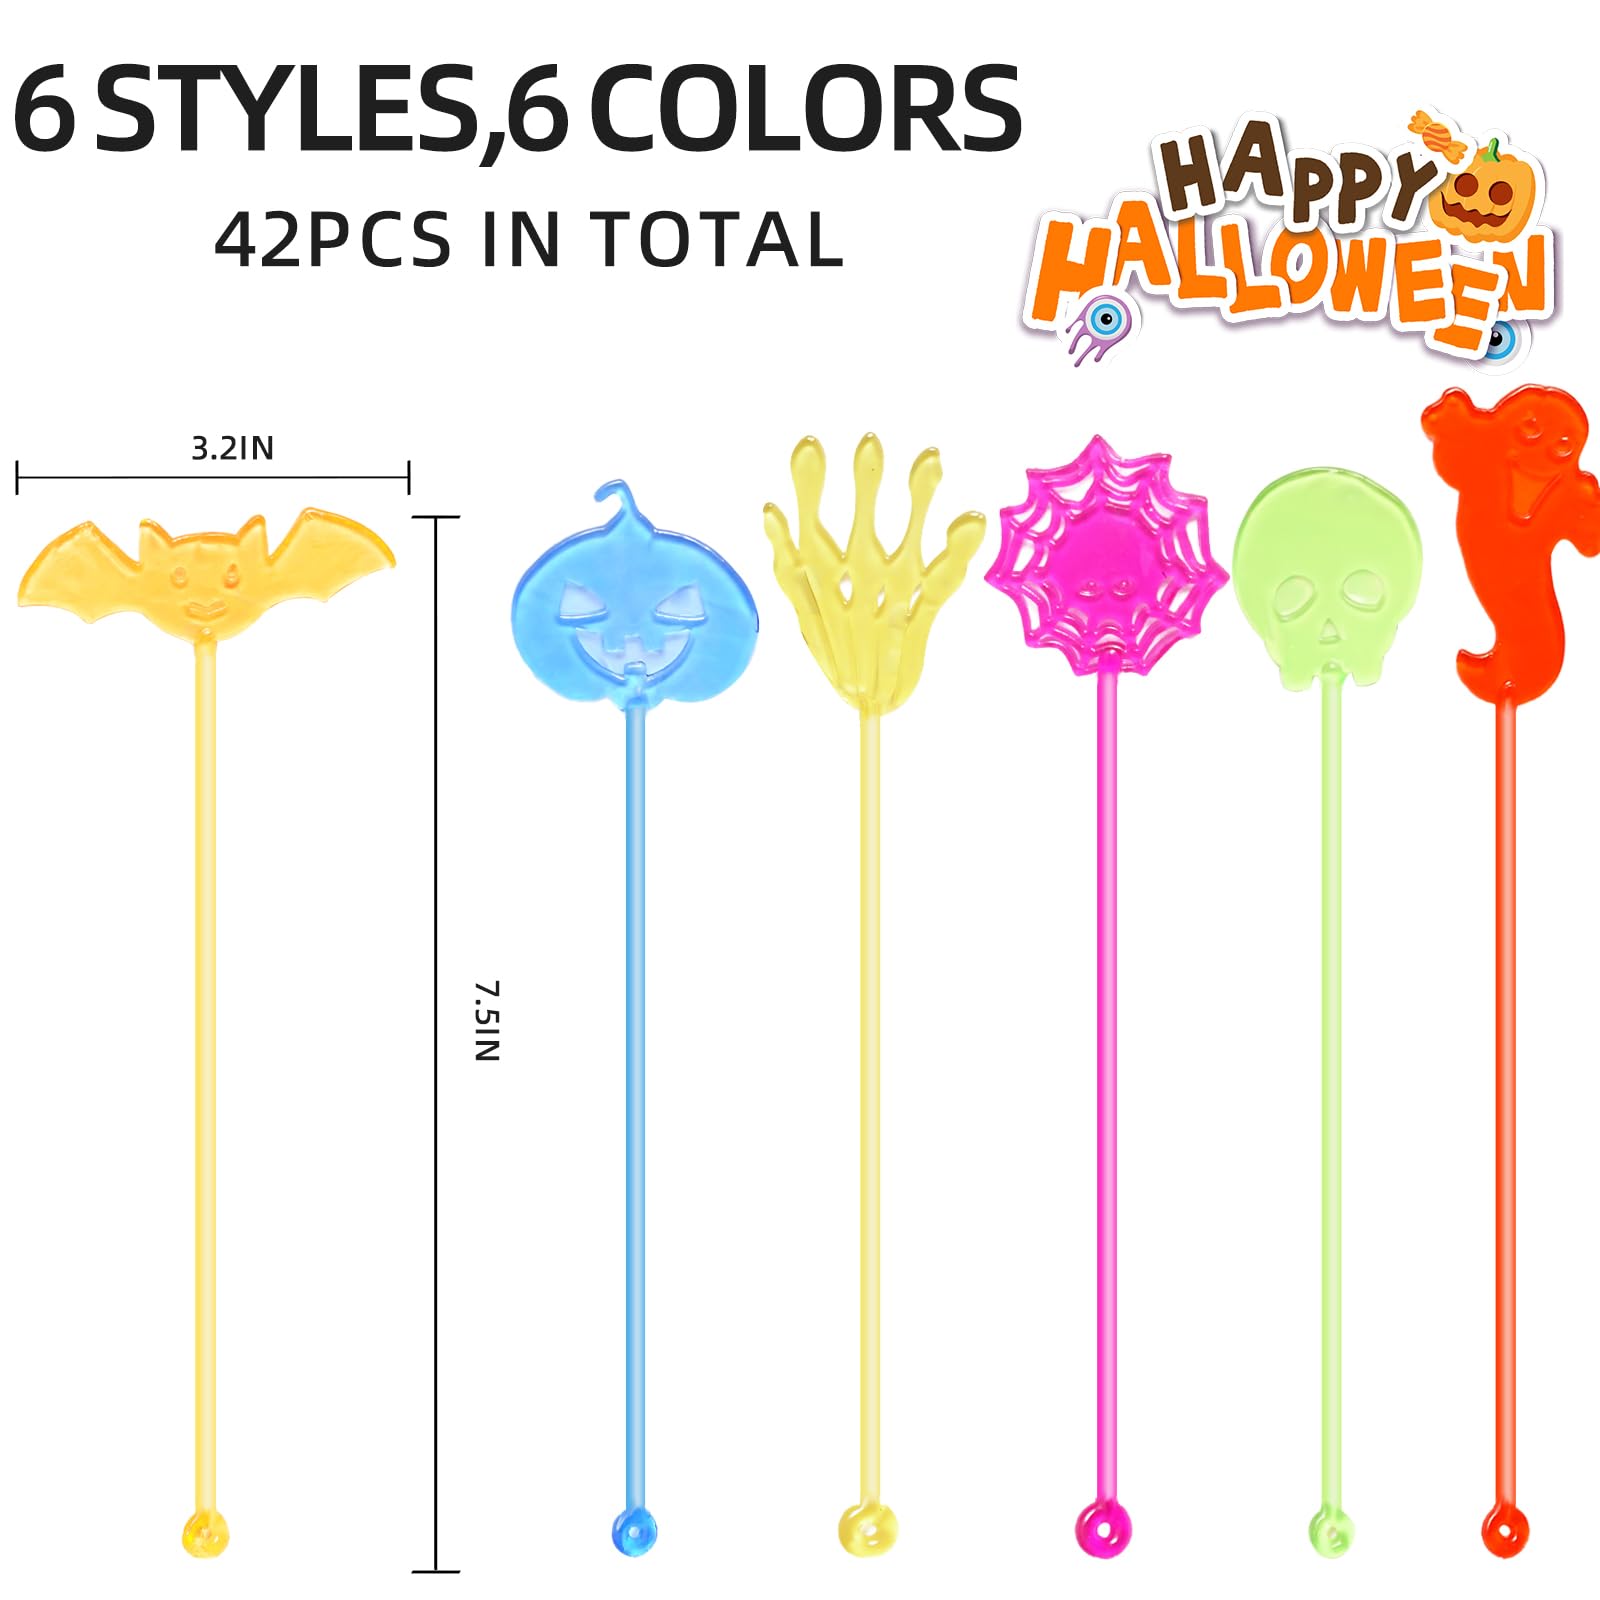 42pcs Halloween Sticky Hands Party Favors for Kids Birthday Supplies Goodie Bag Stuffers Classroom Treasure Box Carnival Prizes Bulk, Skull Skeleton Bat Ghost Pumpkin Styles Mini Stretchy Toys